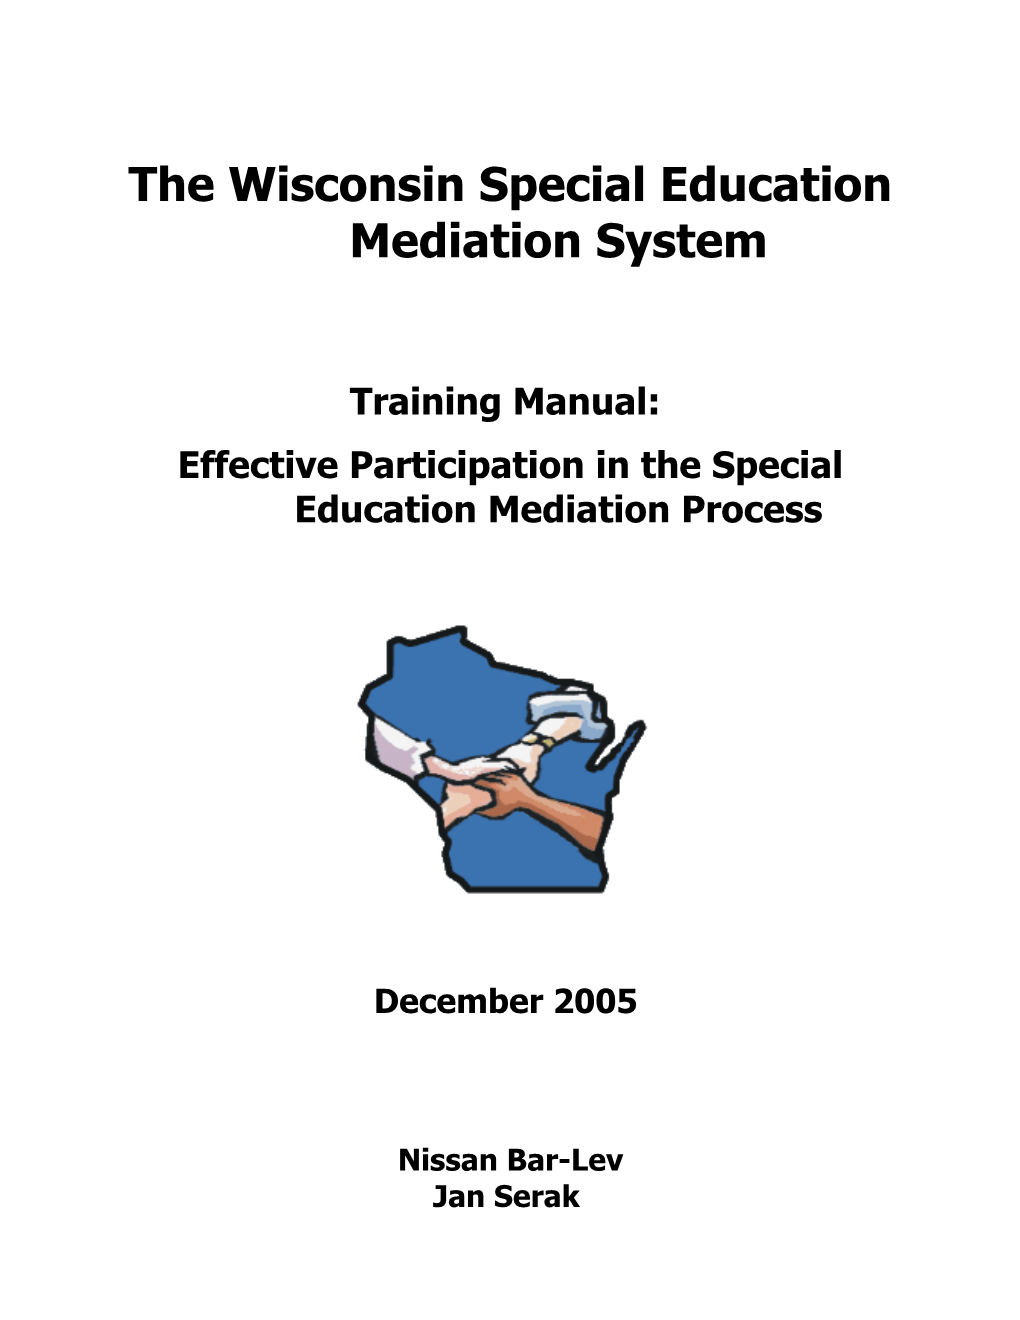 The Wisconsin Special Education Mediation System